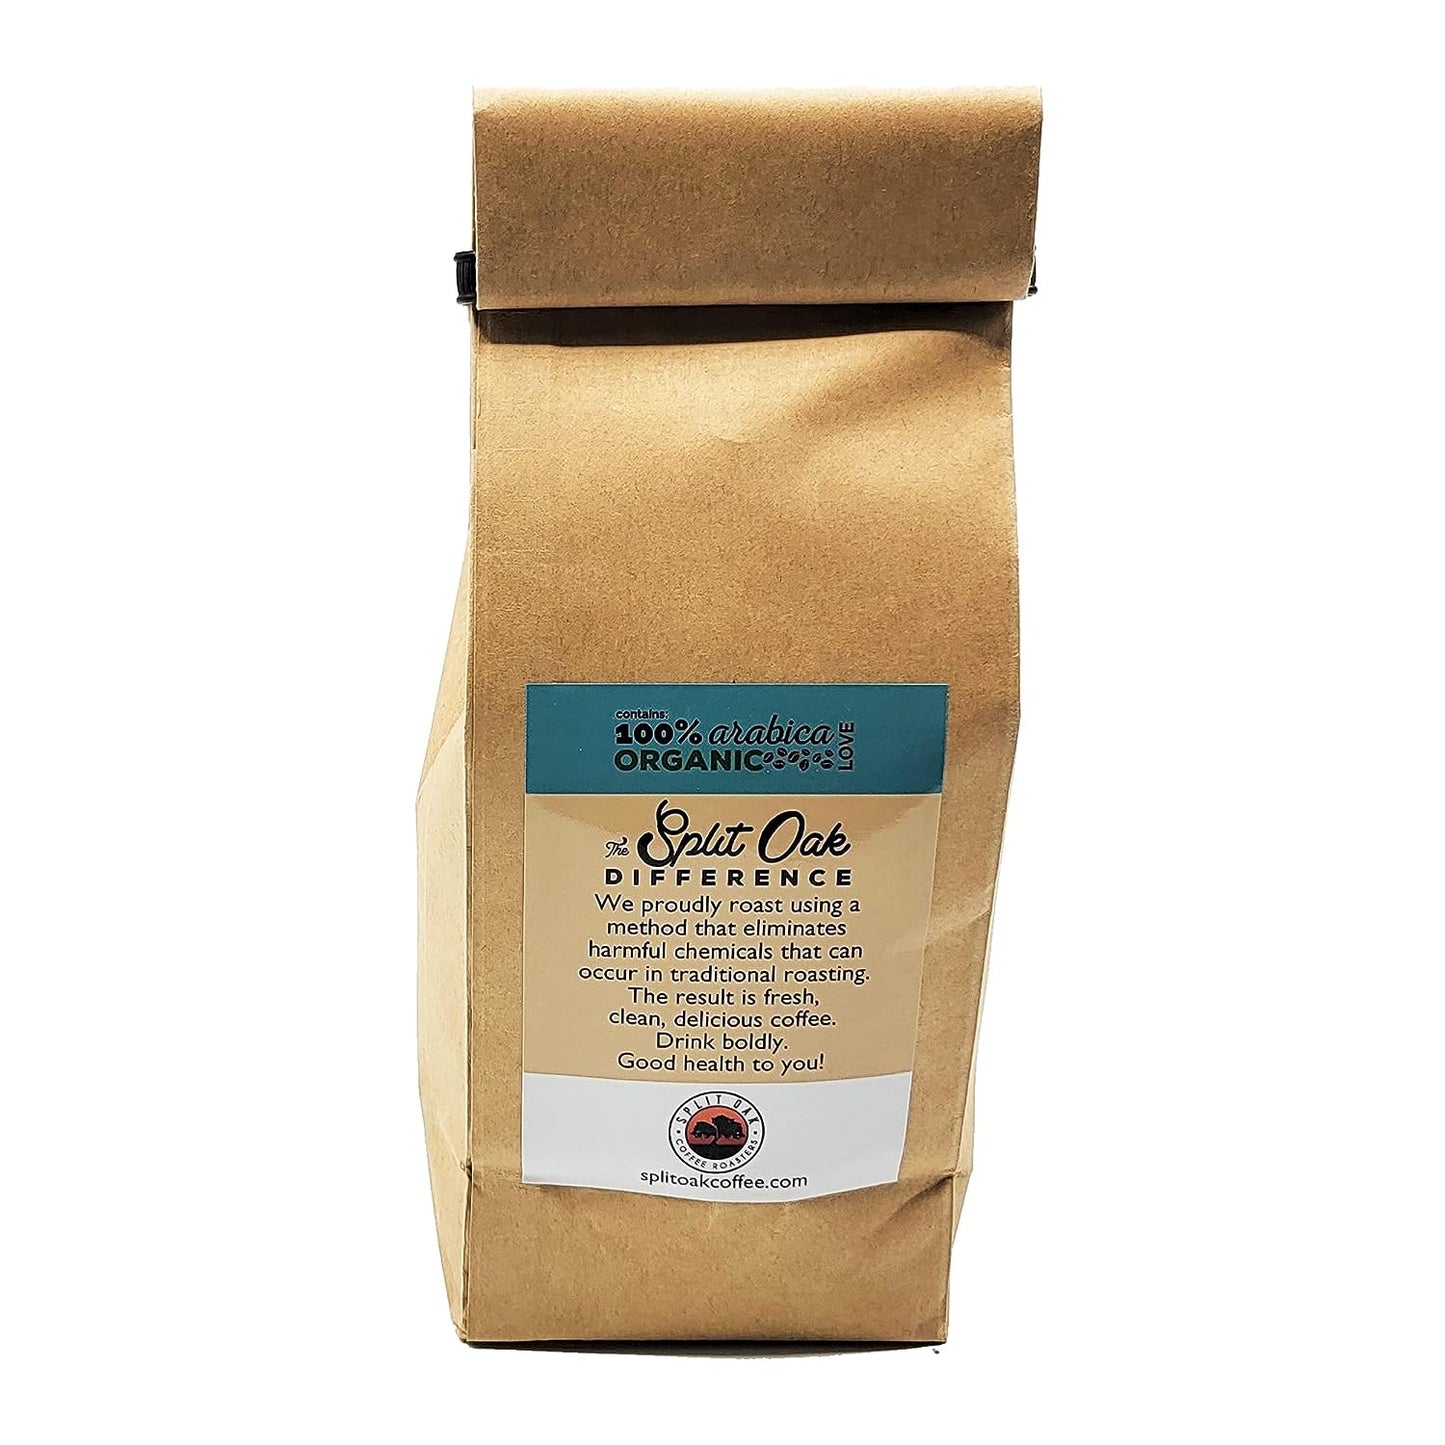 3 Pack Organic Nona Espresso Whole Beans. Indonesia and South America Best Beans. Perfectly balanced, mind blowing taste